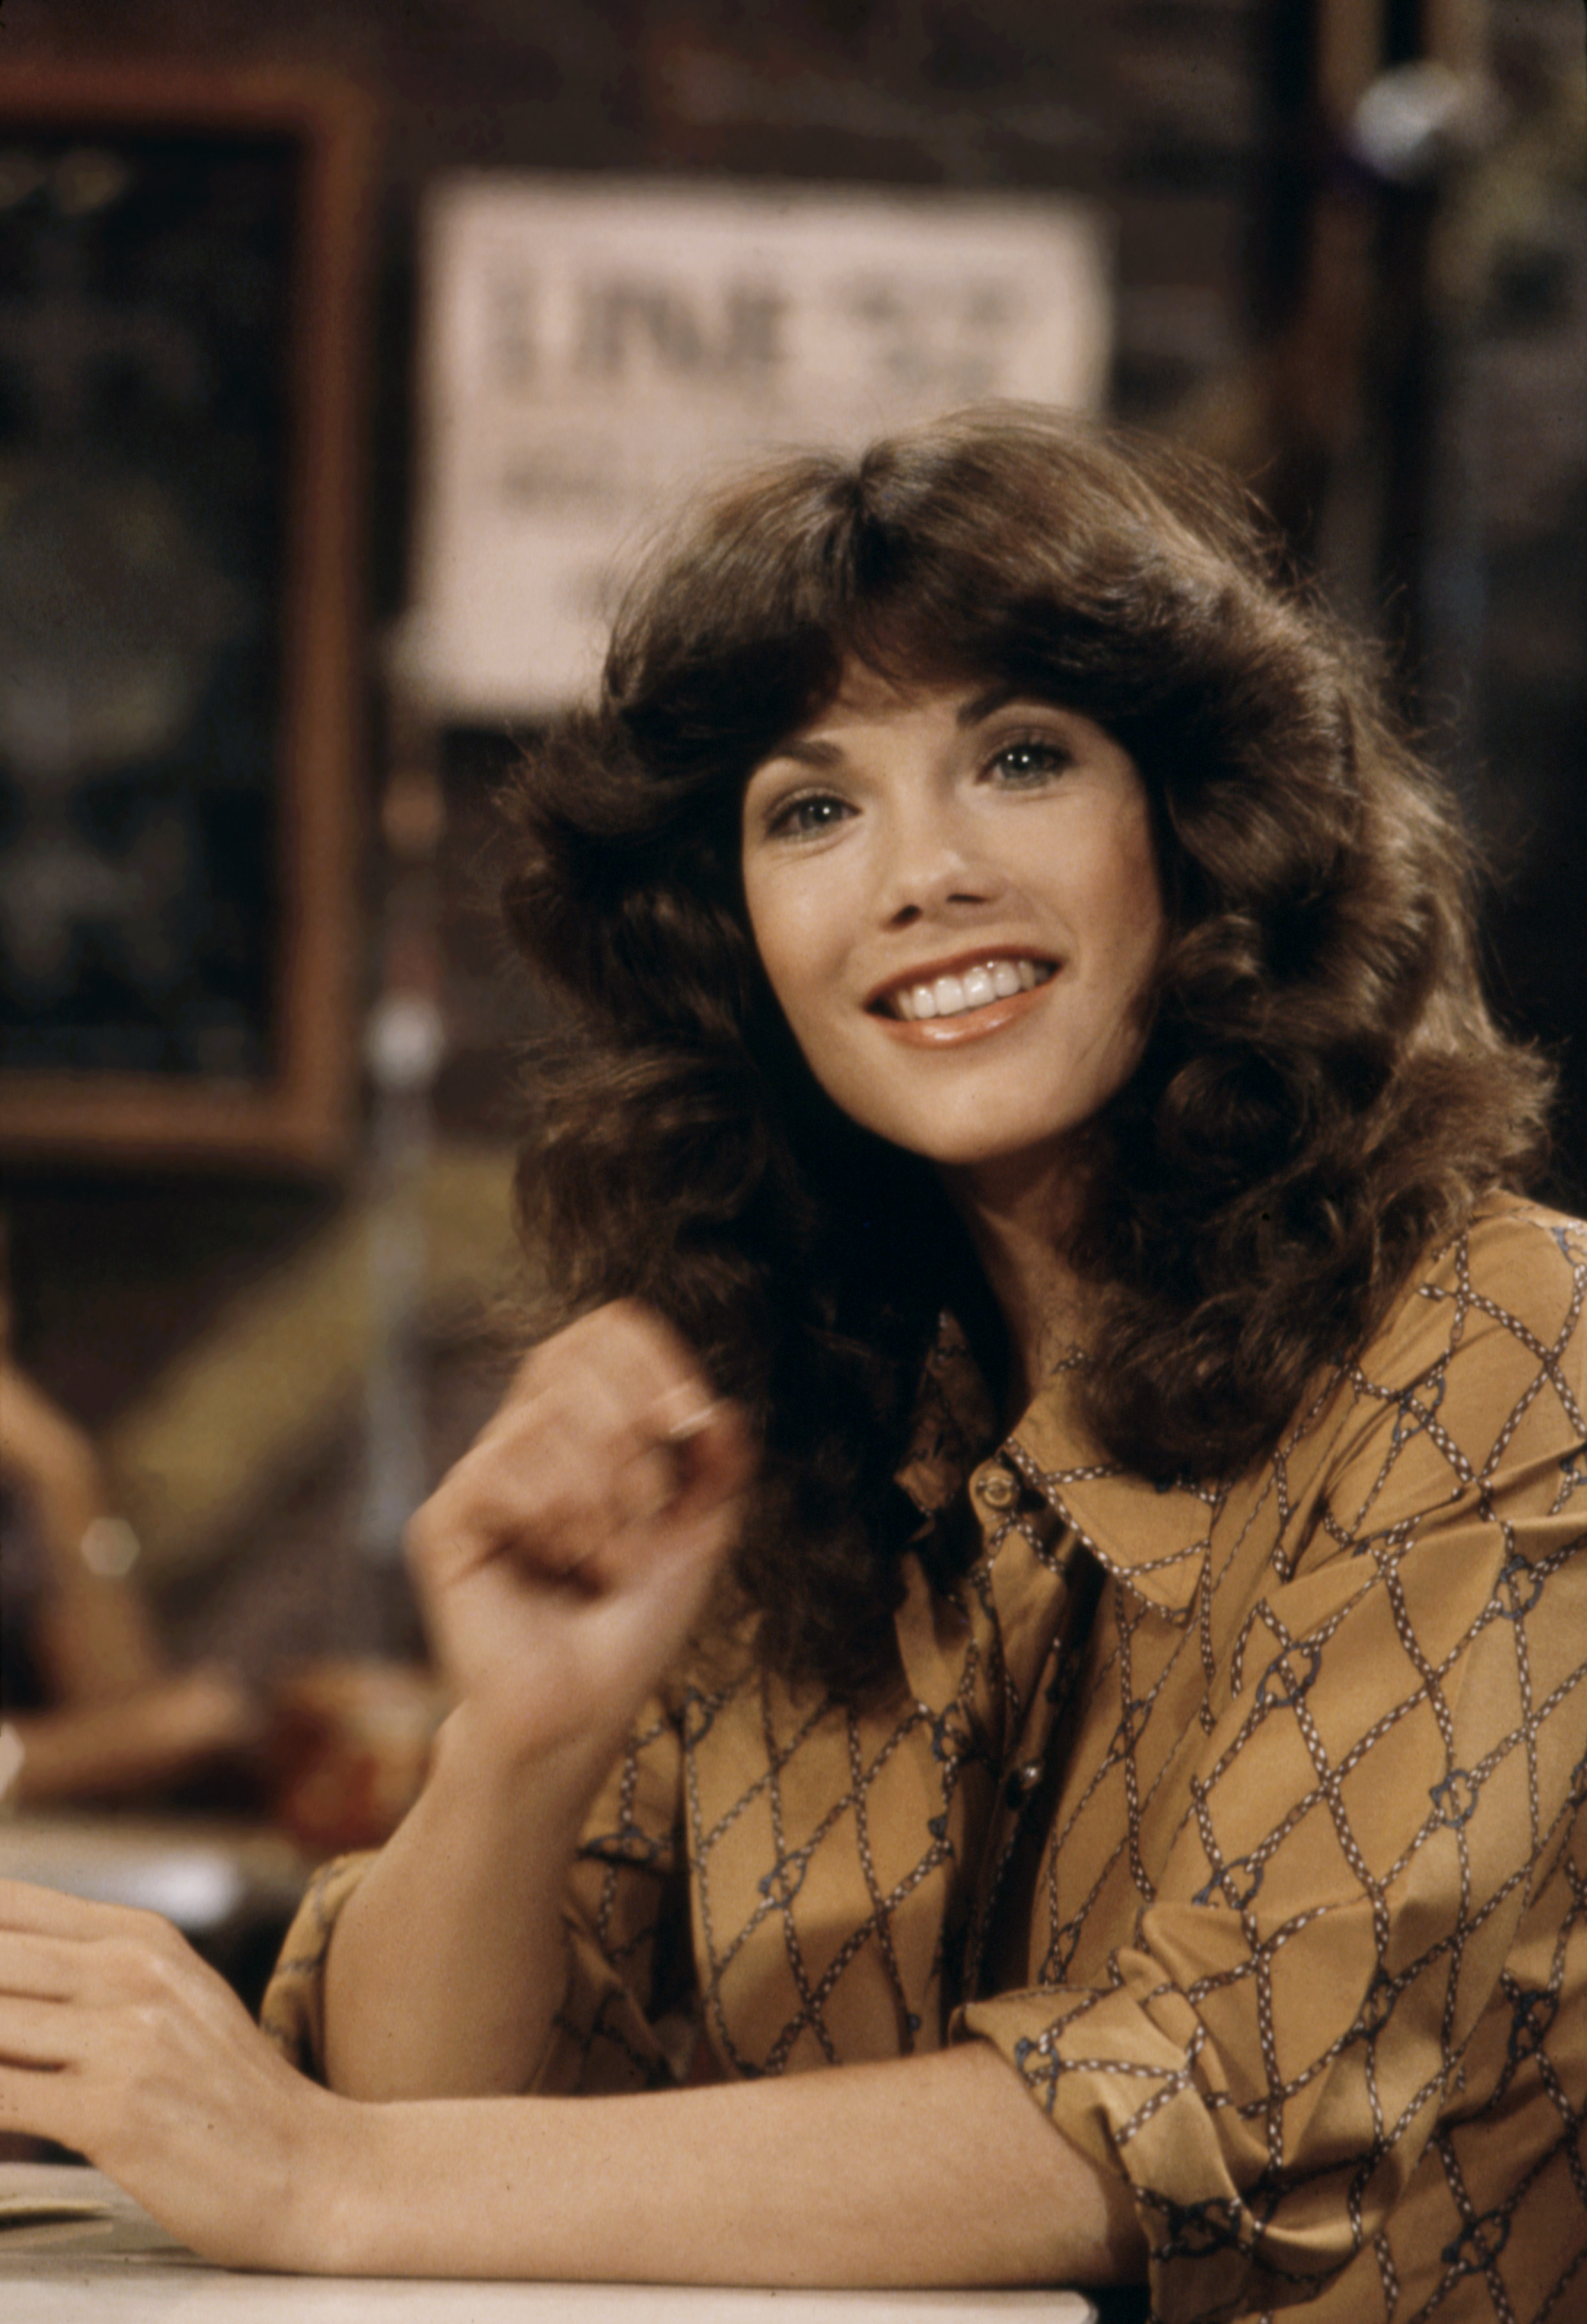 Barbi Benton on "Sugar Time" in 1989 | Source: Getty Images